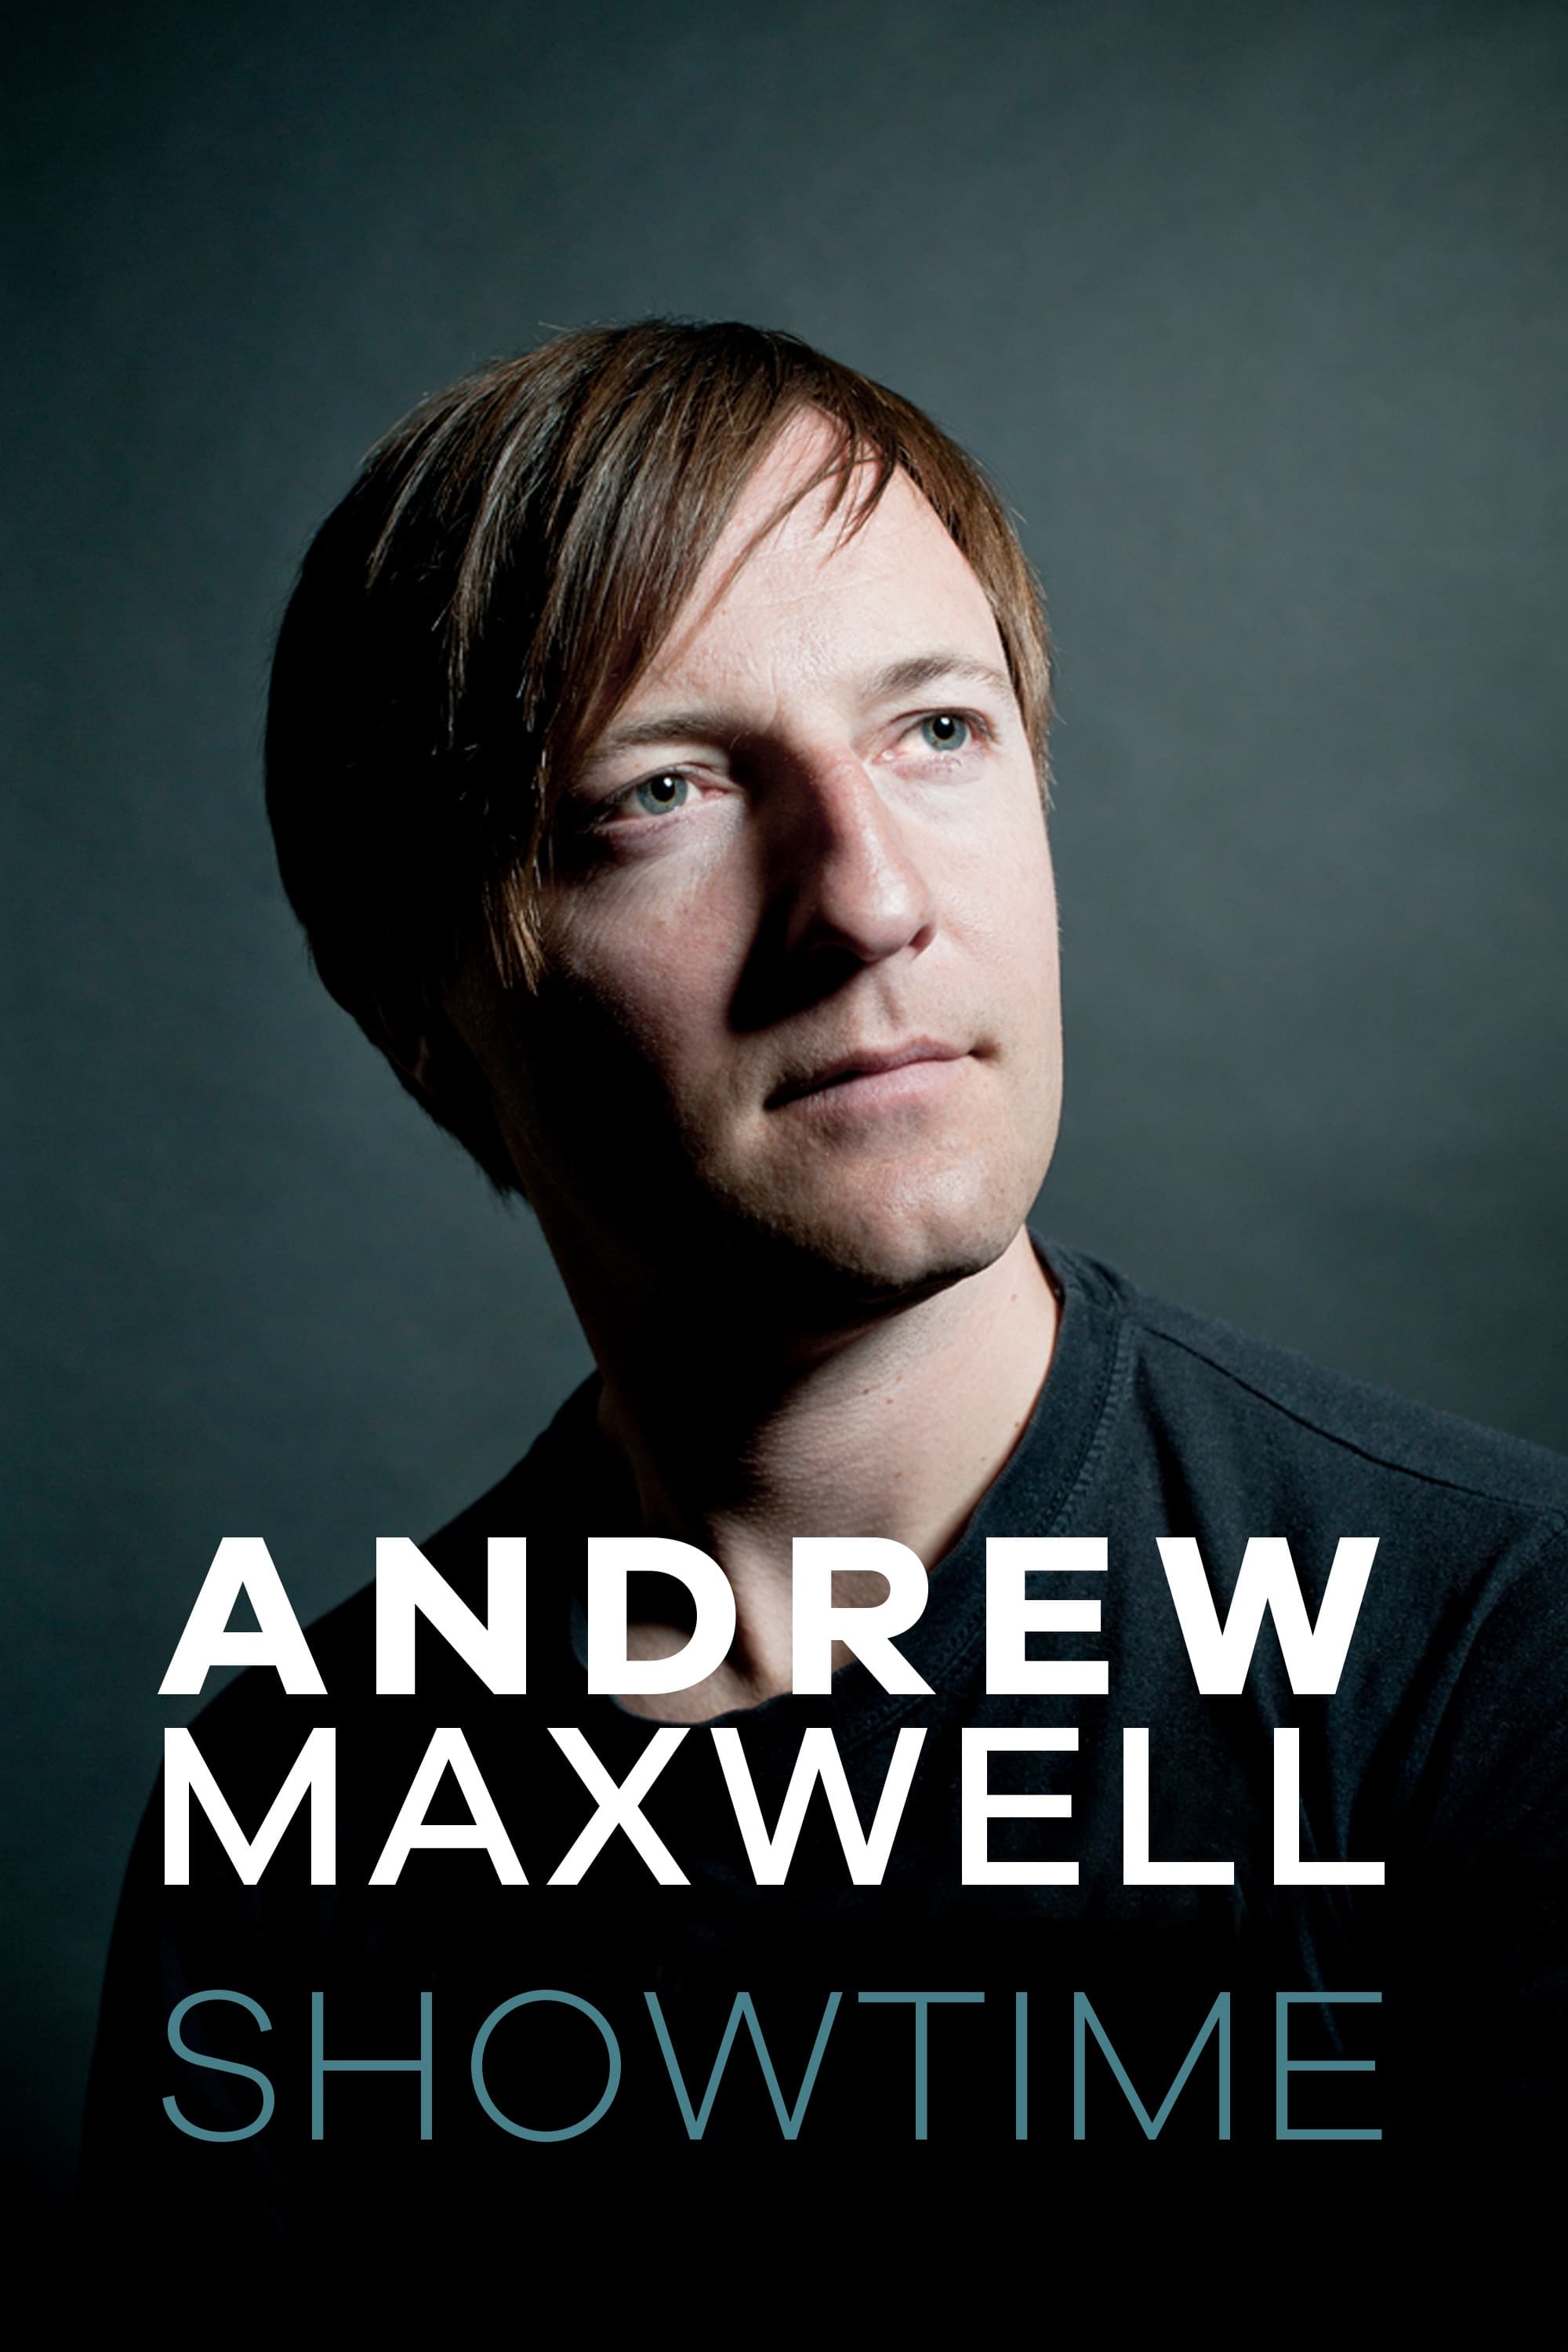 Andrew Maxwell - Showtime